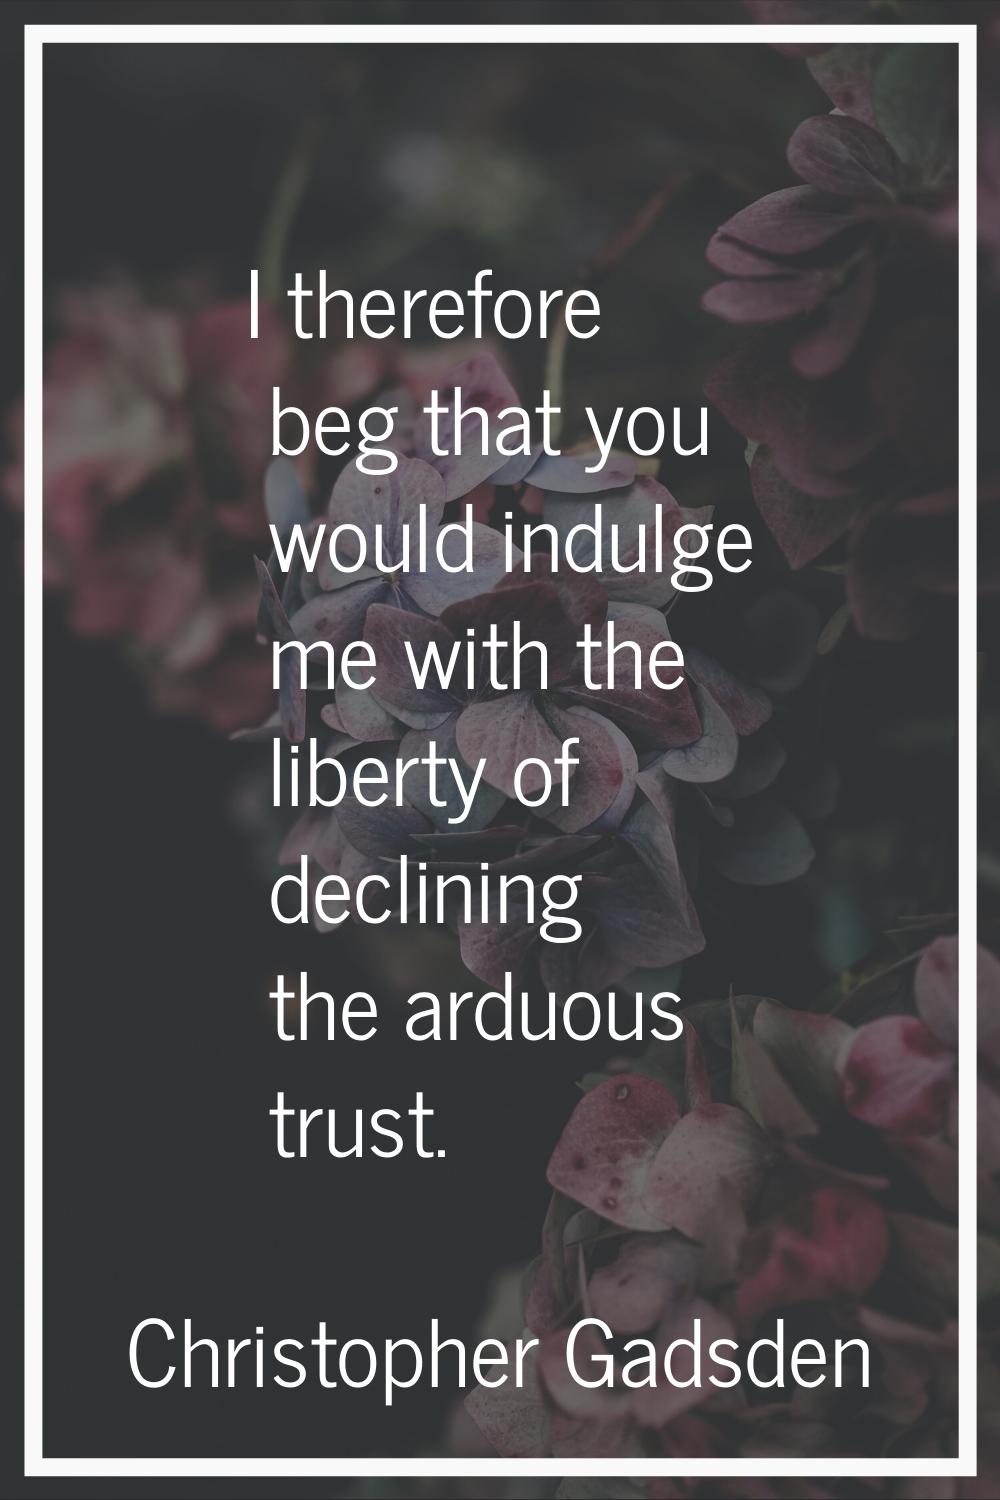 I therefore beg that you would indulge me with the liberty of declining the arduous trust.